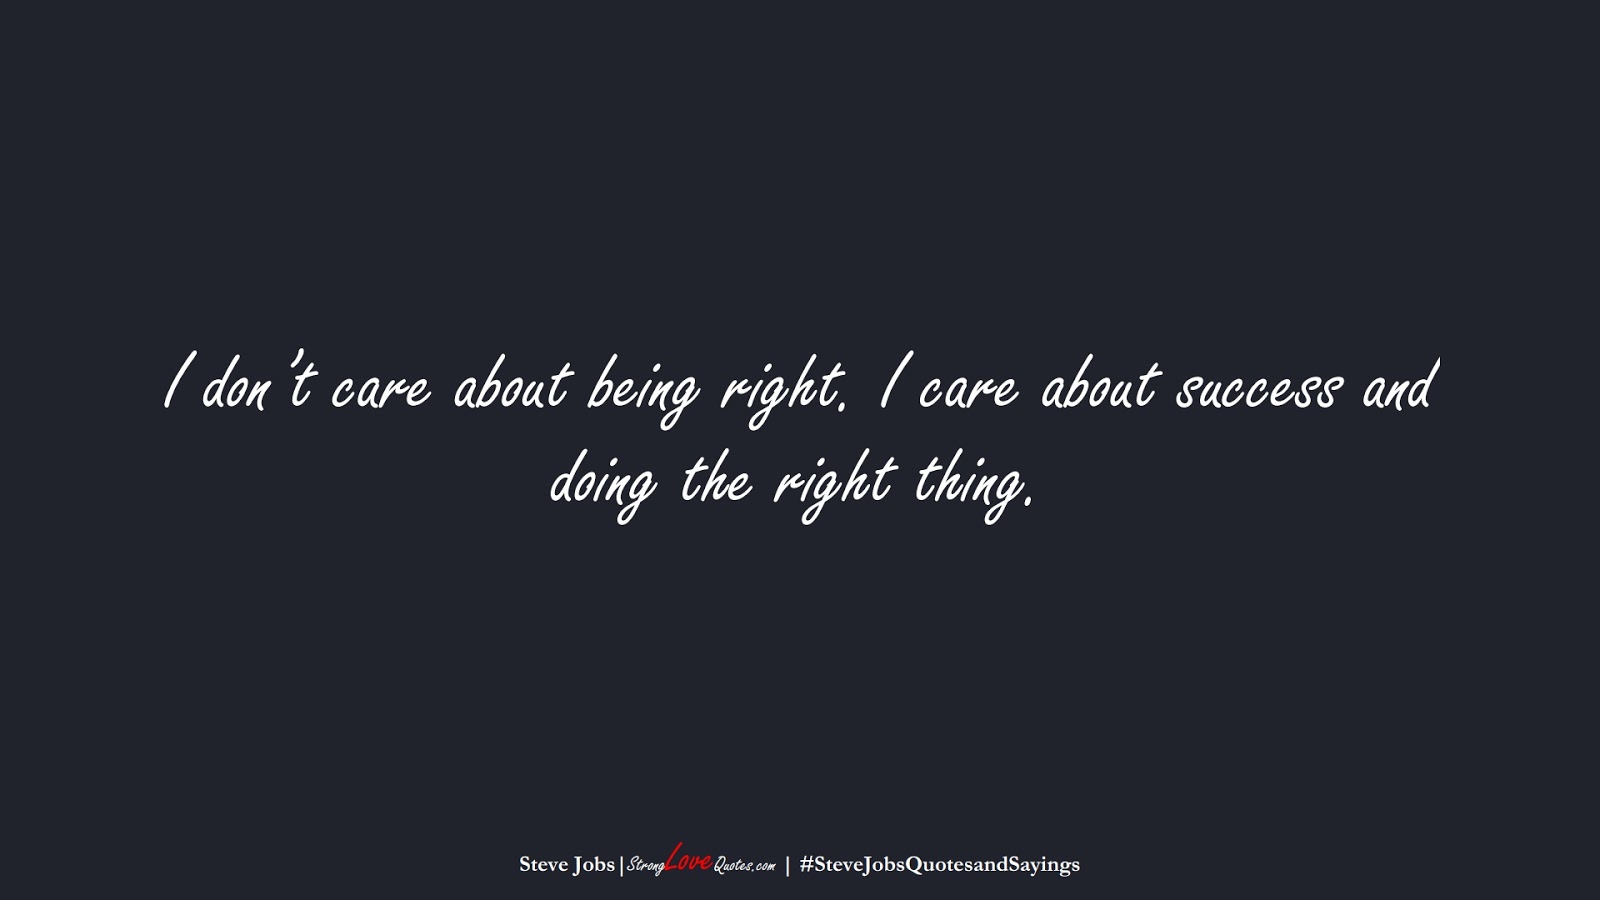 I don’t care about being right. I care about success and doing the right thing. (Steve Jobs);  #SteveJobsQuotesandSayings